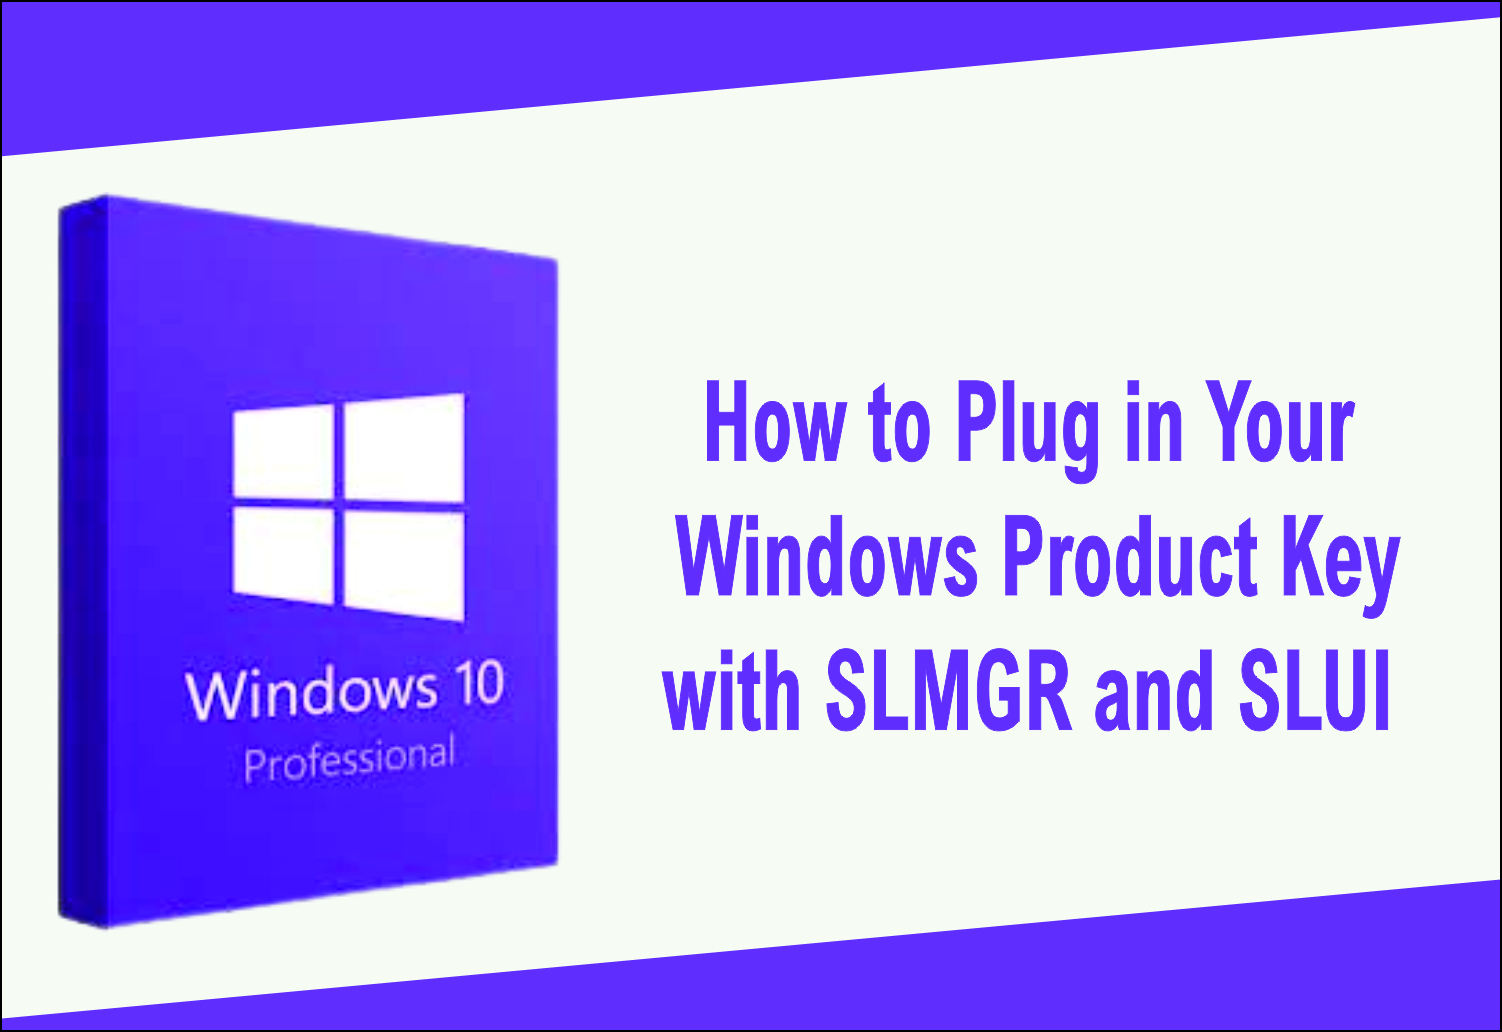 How to plug in a product key with SLMGR and SLUI